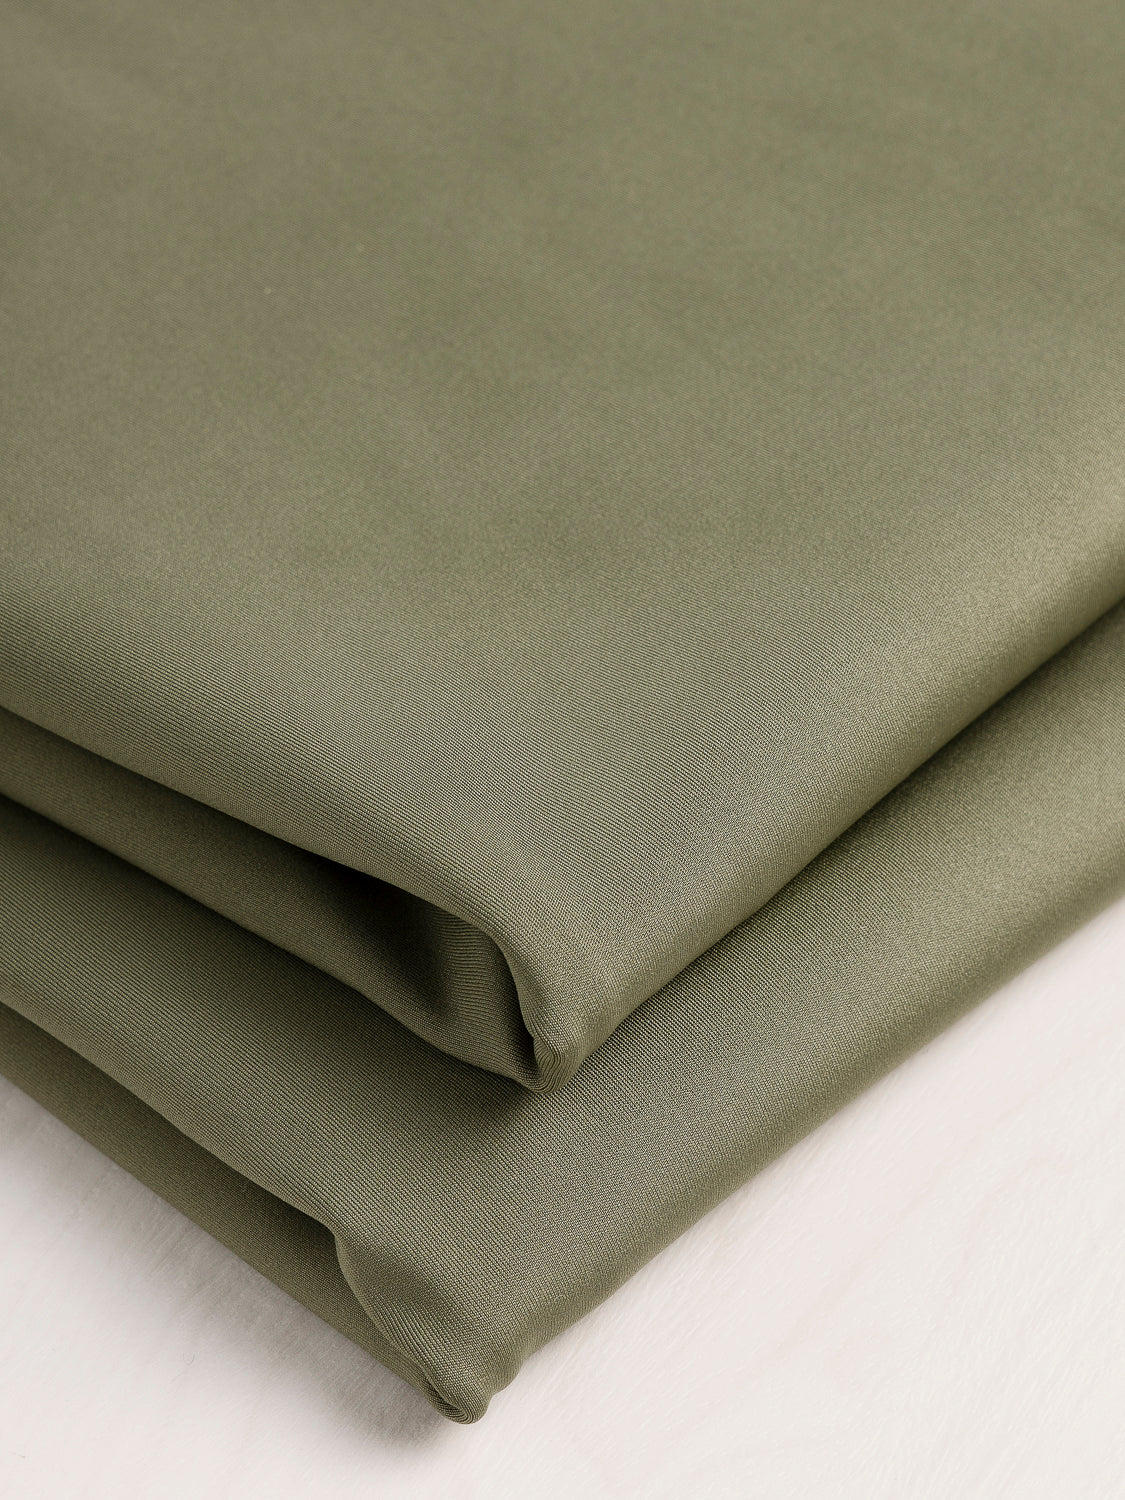 Three-dimensional Abrasion Resistant Fabric, Eco Compression: Sustainable  Performance Textiles